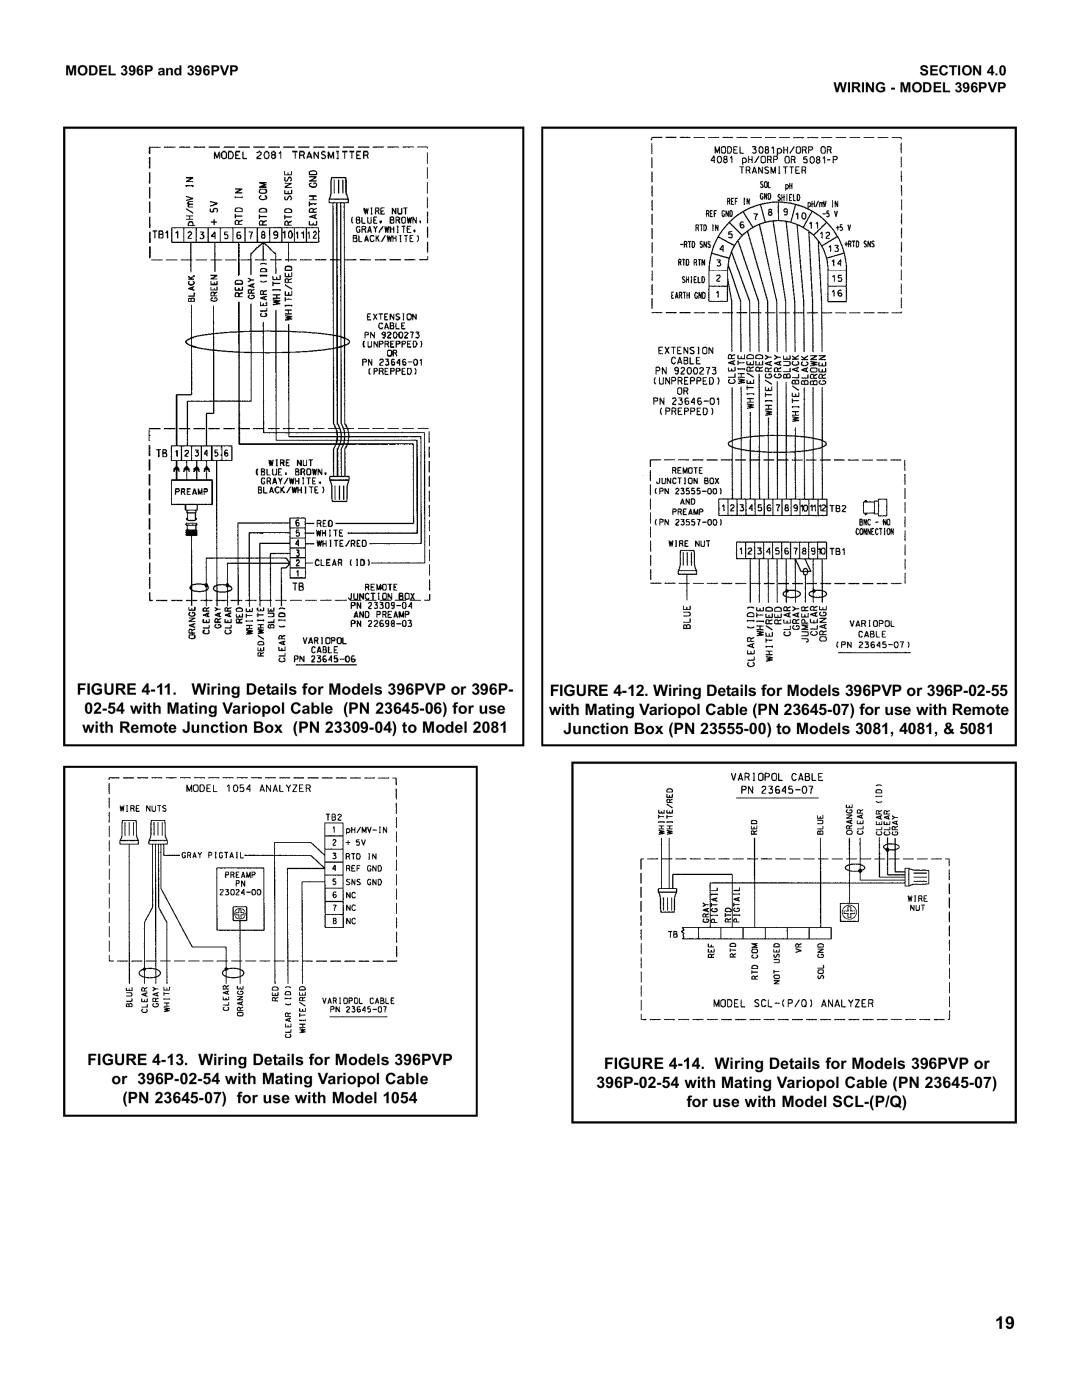 Emerson Process Management instruction manual 13.Wiring Details for Models 396PVP 